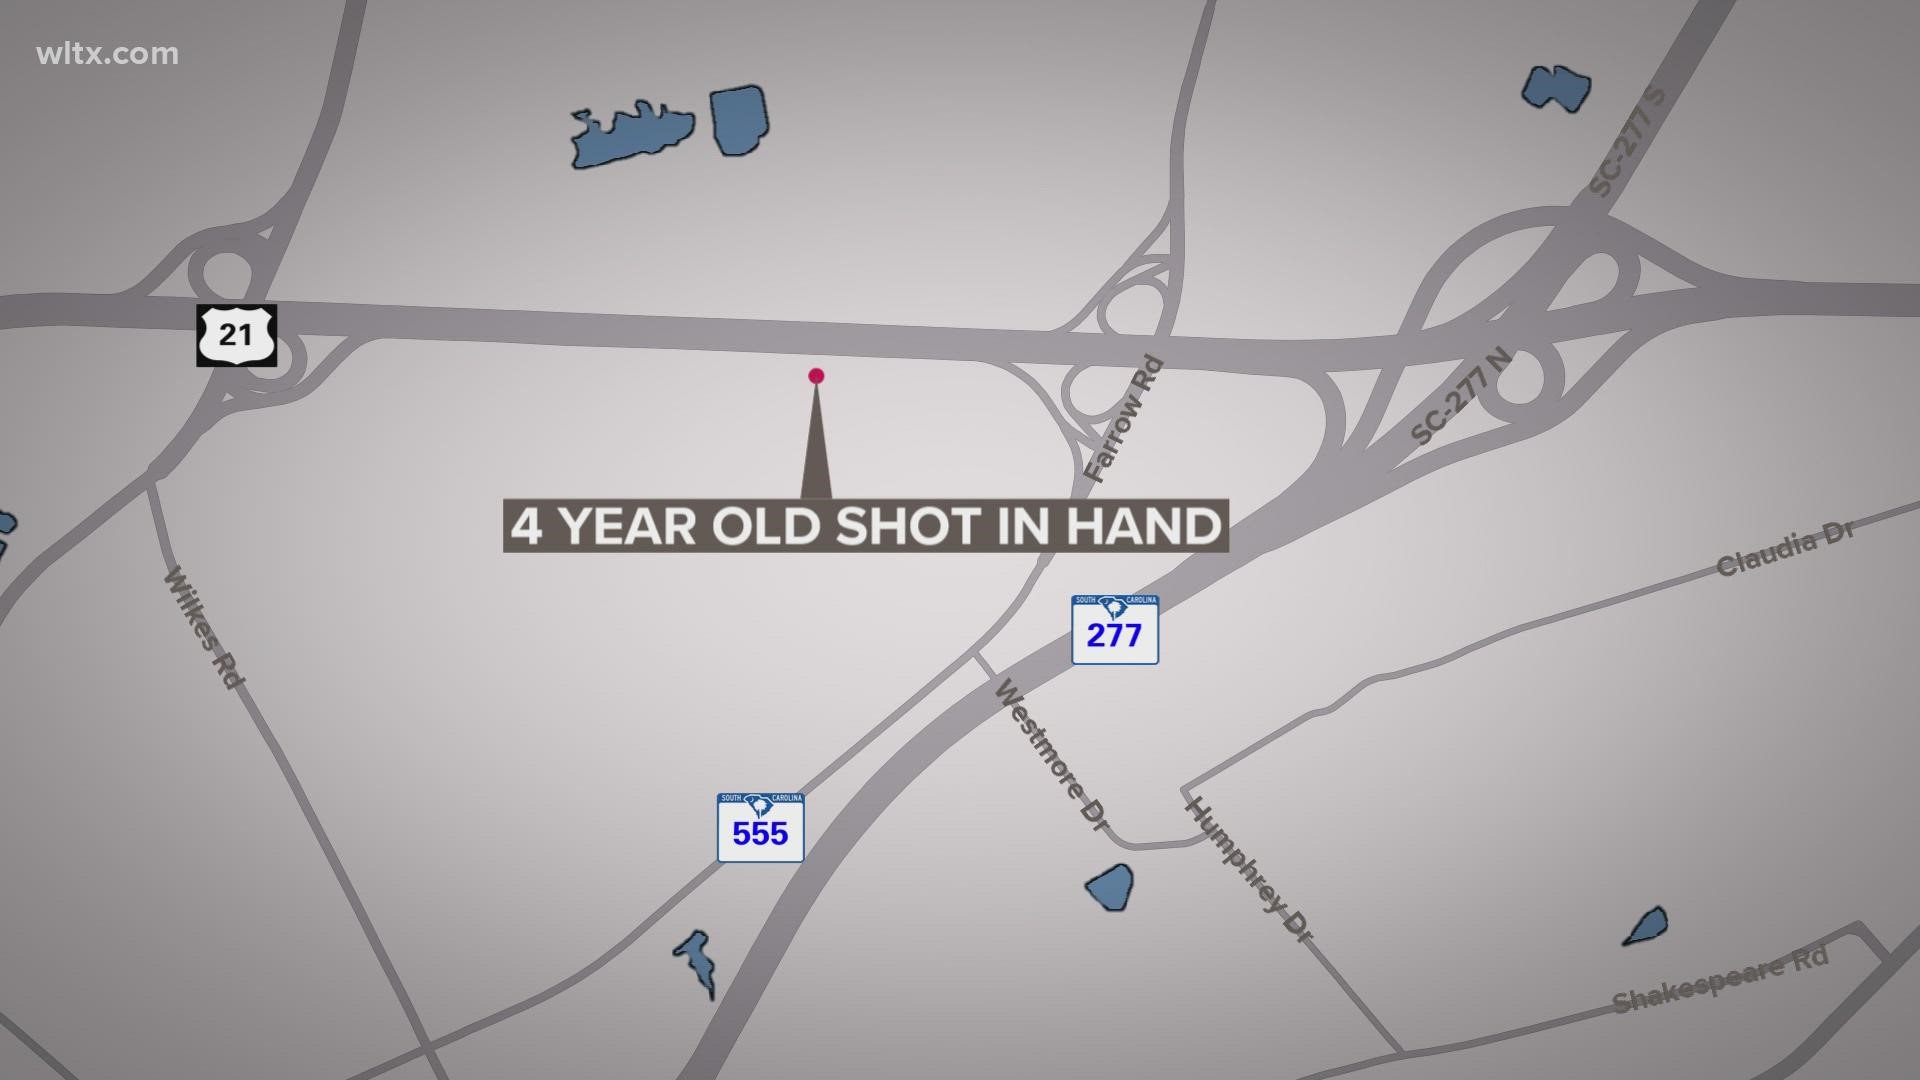 The child, 4, was shot in the hand this morning on Cindy Drive in Columbia.